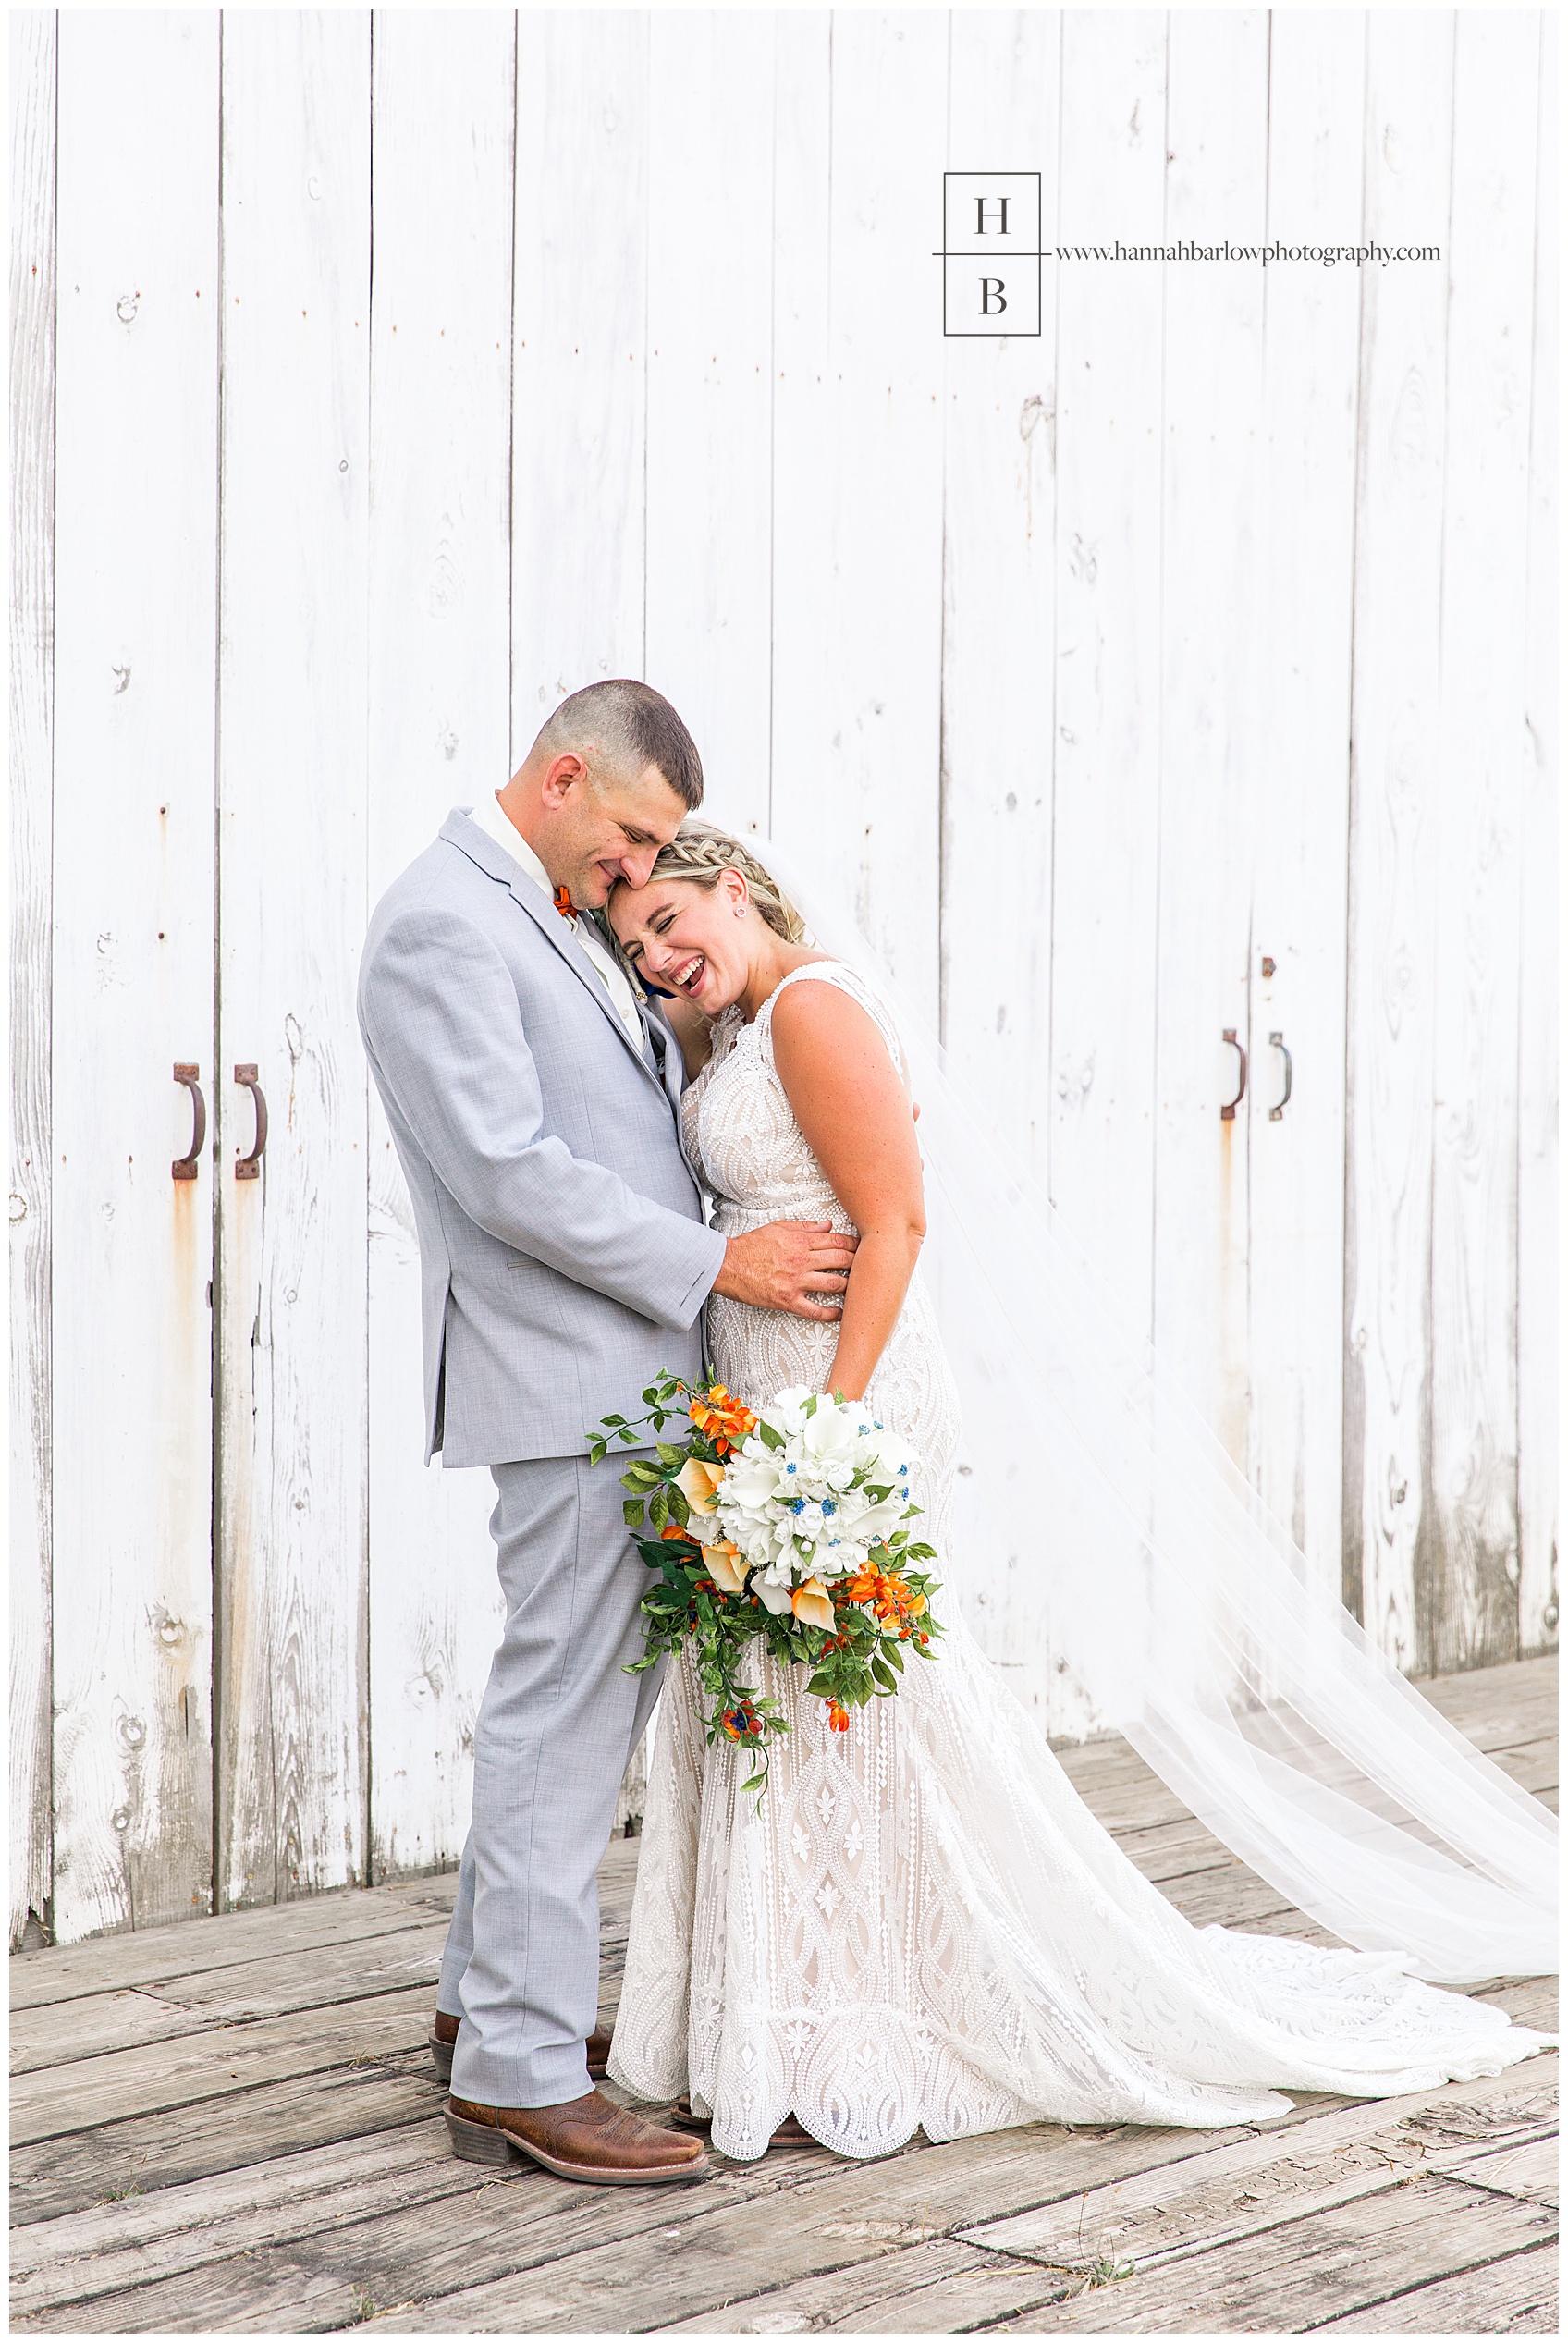 Renshaw Farms Wedding Bride and Groom Photos in Front of White Barn